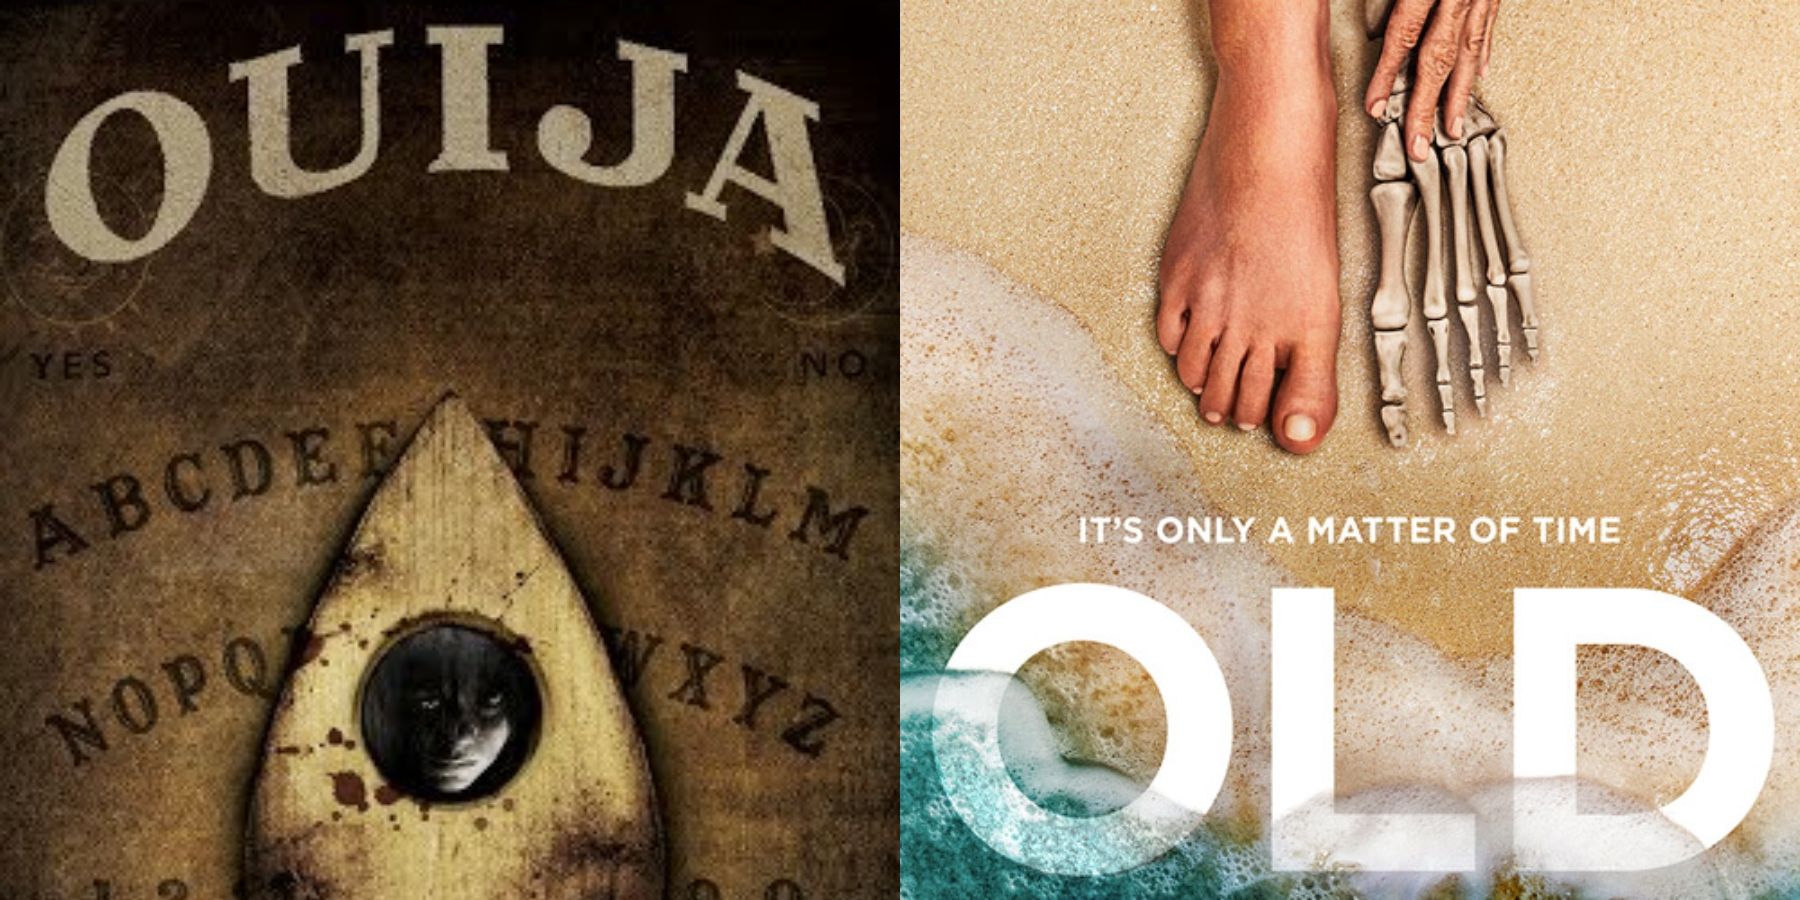 Split image of Ouija and Old movie posters